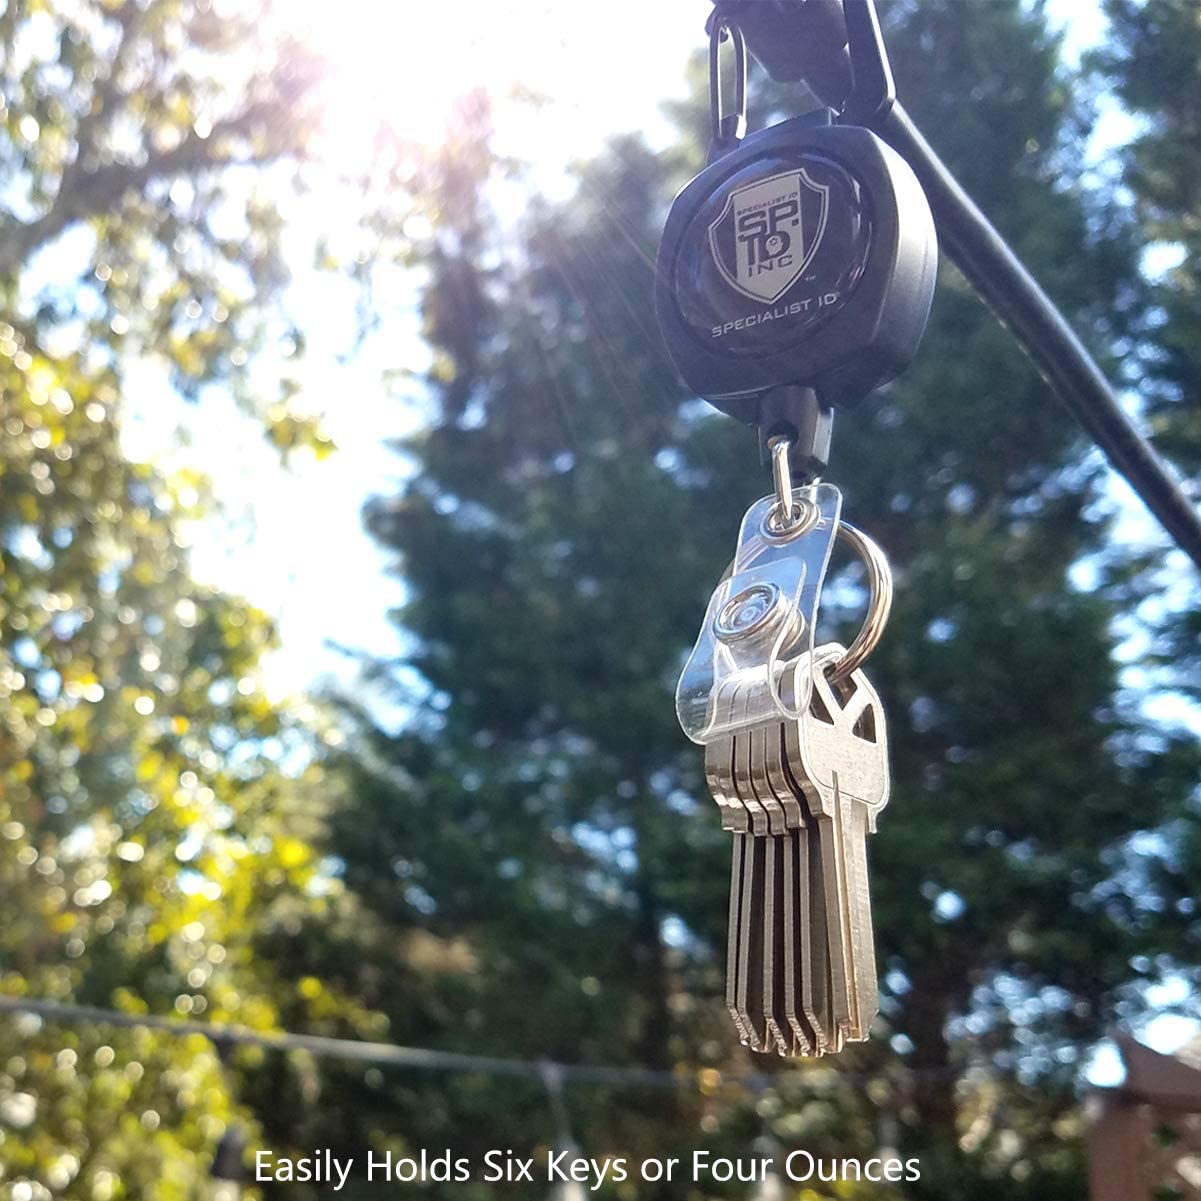 A SPID Key-Bak SIDEKICK Heavy Duty Retractable Carabiner Badge Reel with ID Holder Strap & Keychain with a Specialist ID logo is shown holding six keys against an outdoor backdrop, featuring a Kevlar Retractable Cord. The text below reads, "Easily Holds Six Keys or Four Ounces.